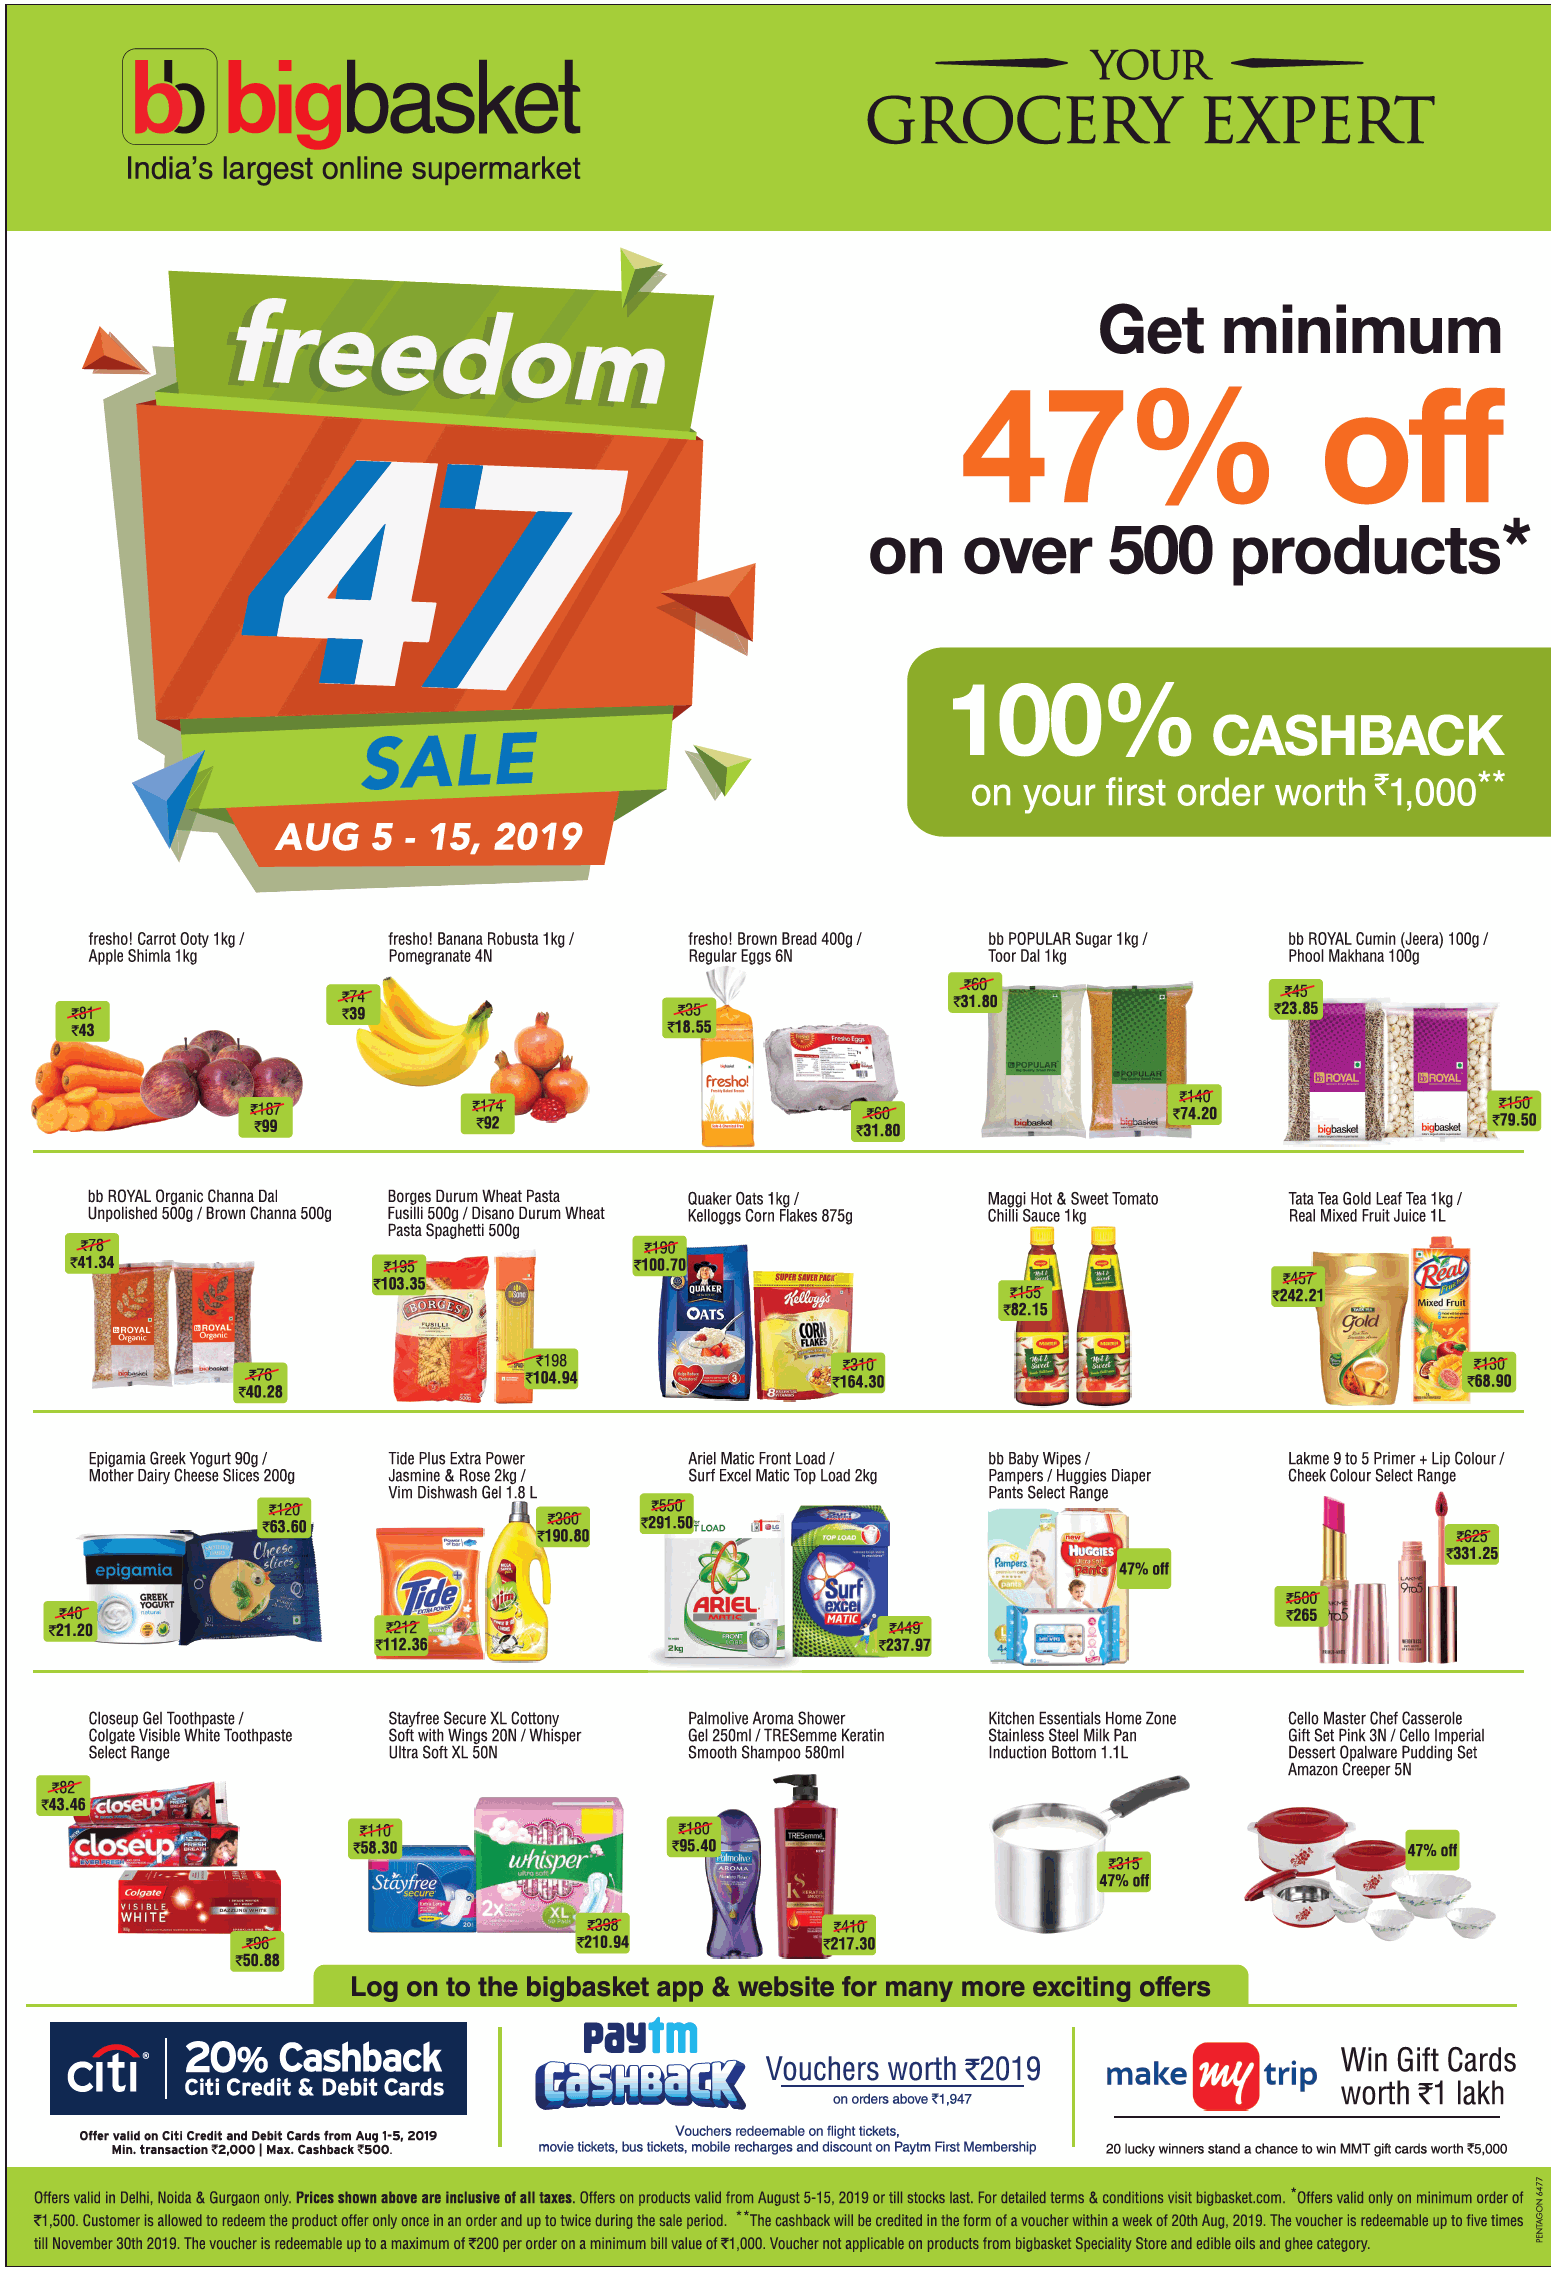 bigbasket-your-grocery-expert-freedom-47-sale-ad-delhi-times-06-08-2019.png